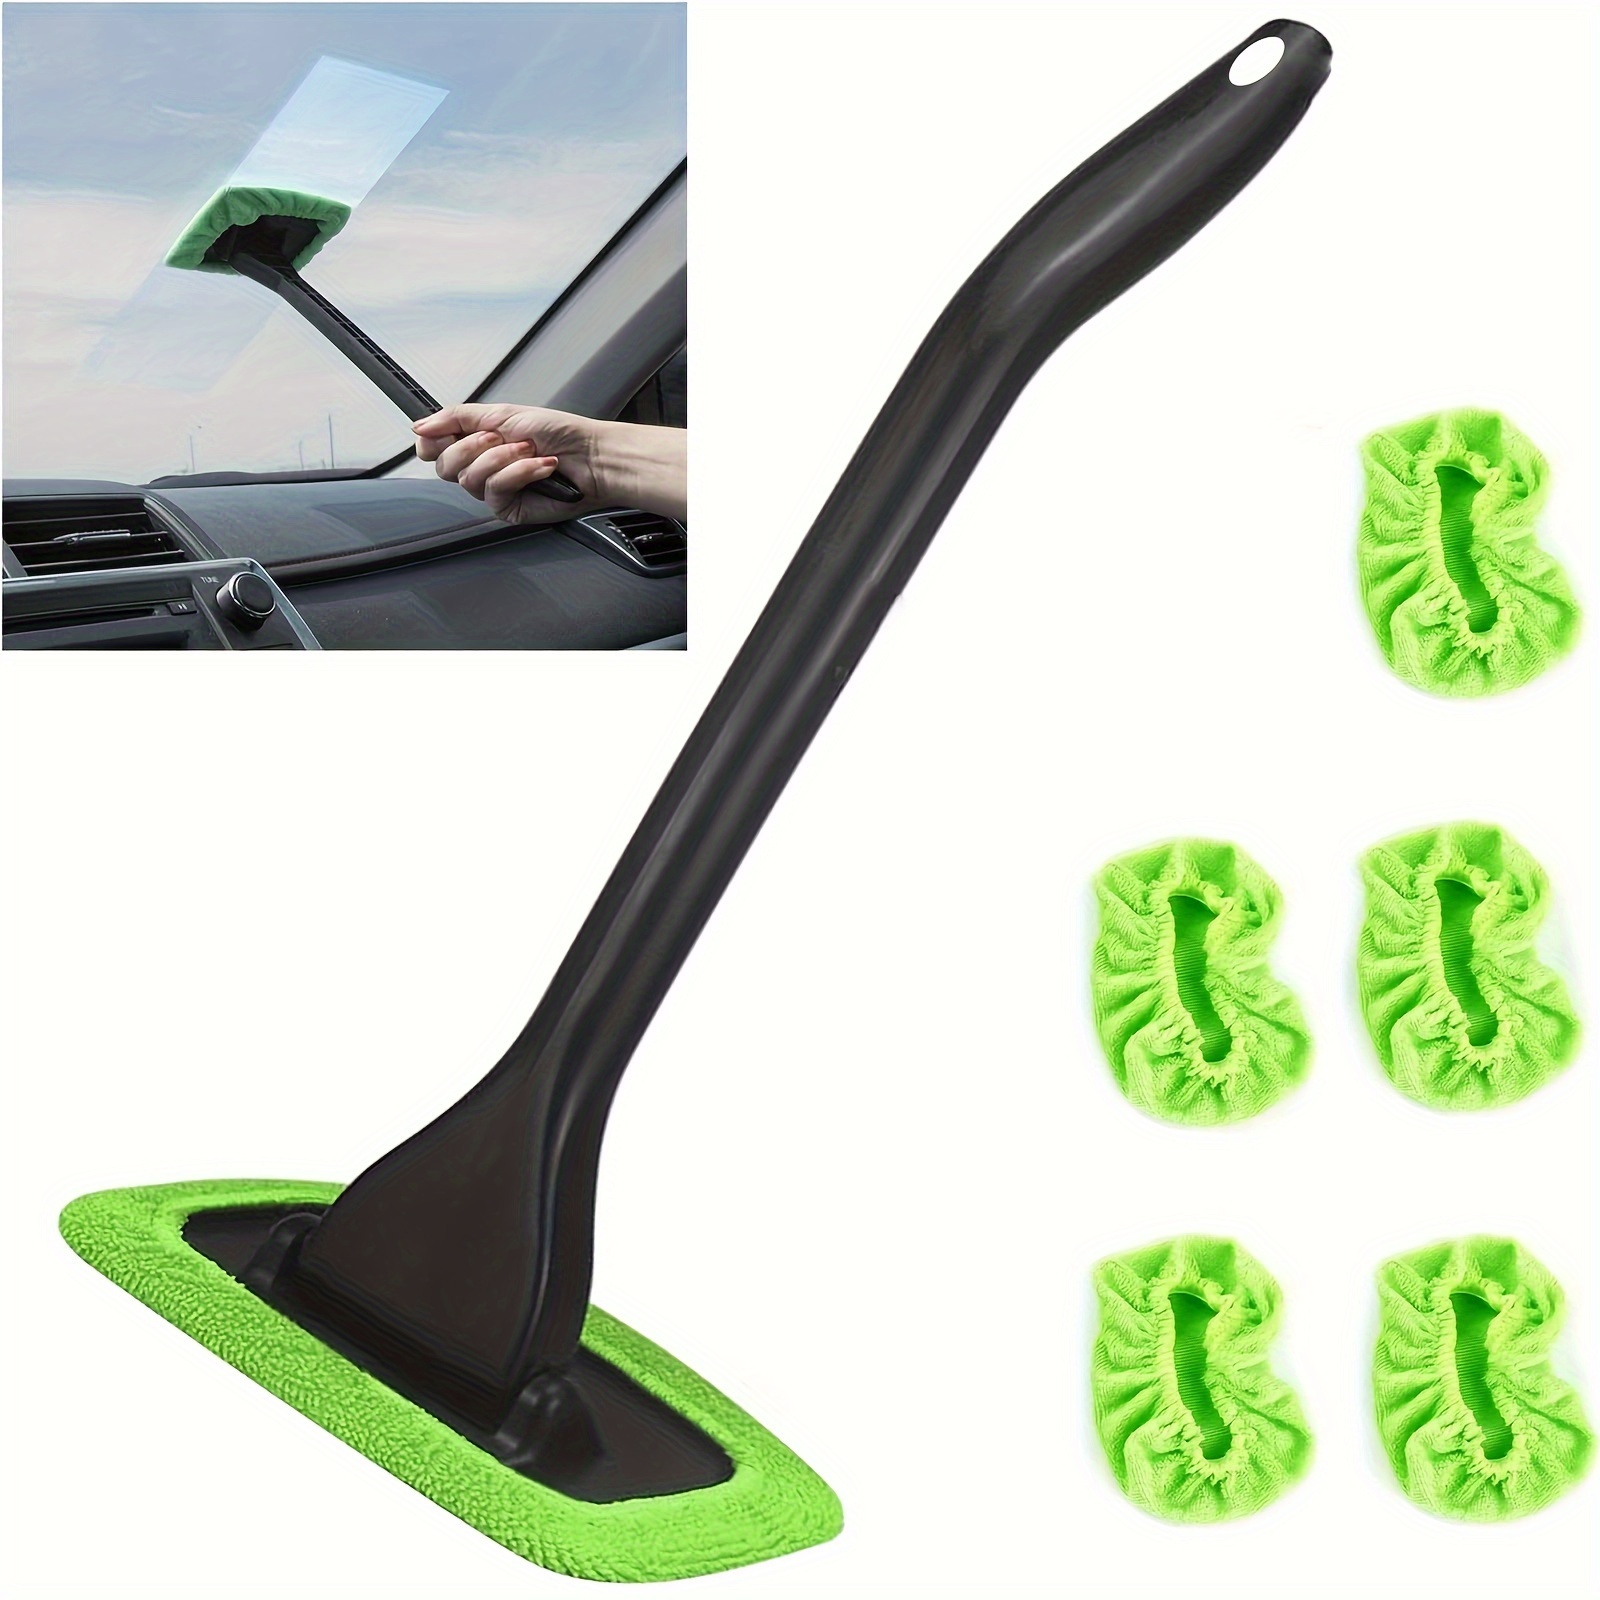 

6pcs-windshield Cleaning Tool Windshield Cleaning Wand Auto Window Cleaner, 5 Pieces Reusable Cloth Pads For Car Interior, Dirty Car Washing Brushes (green)